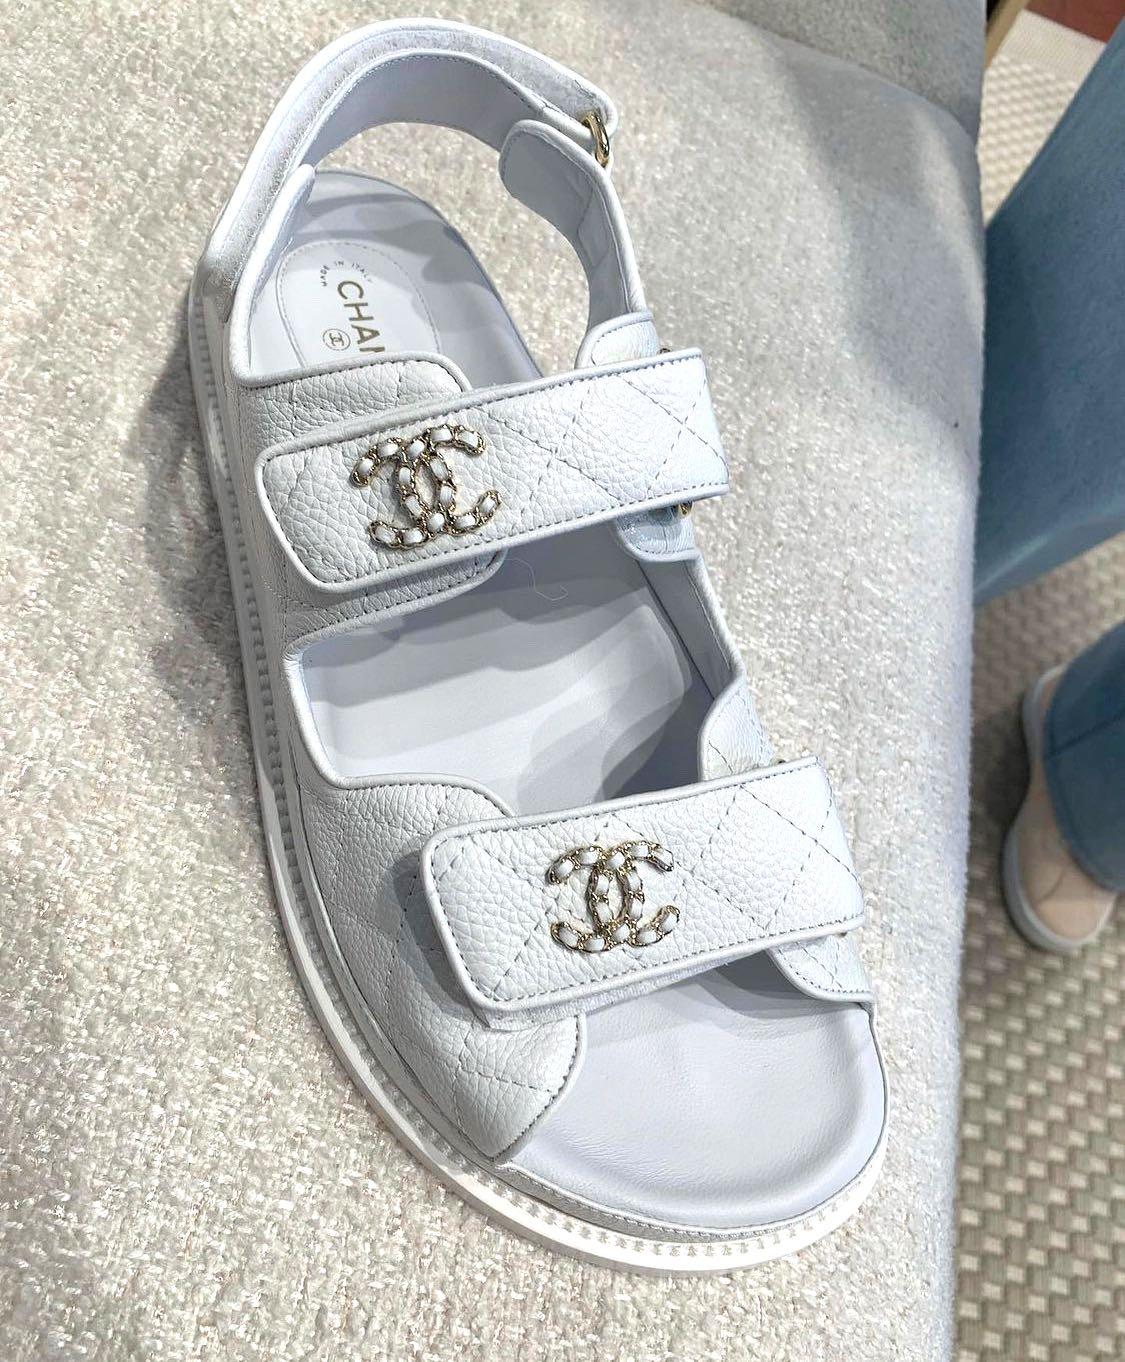 Brand New Chanel Dad Sandals White Size 39.5 and 40. Chanel